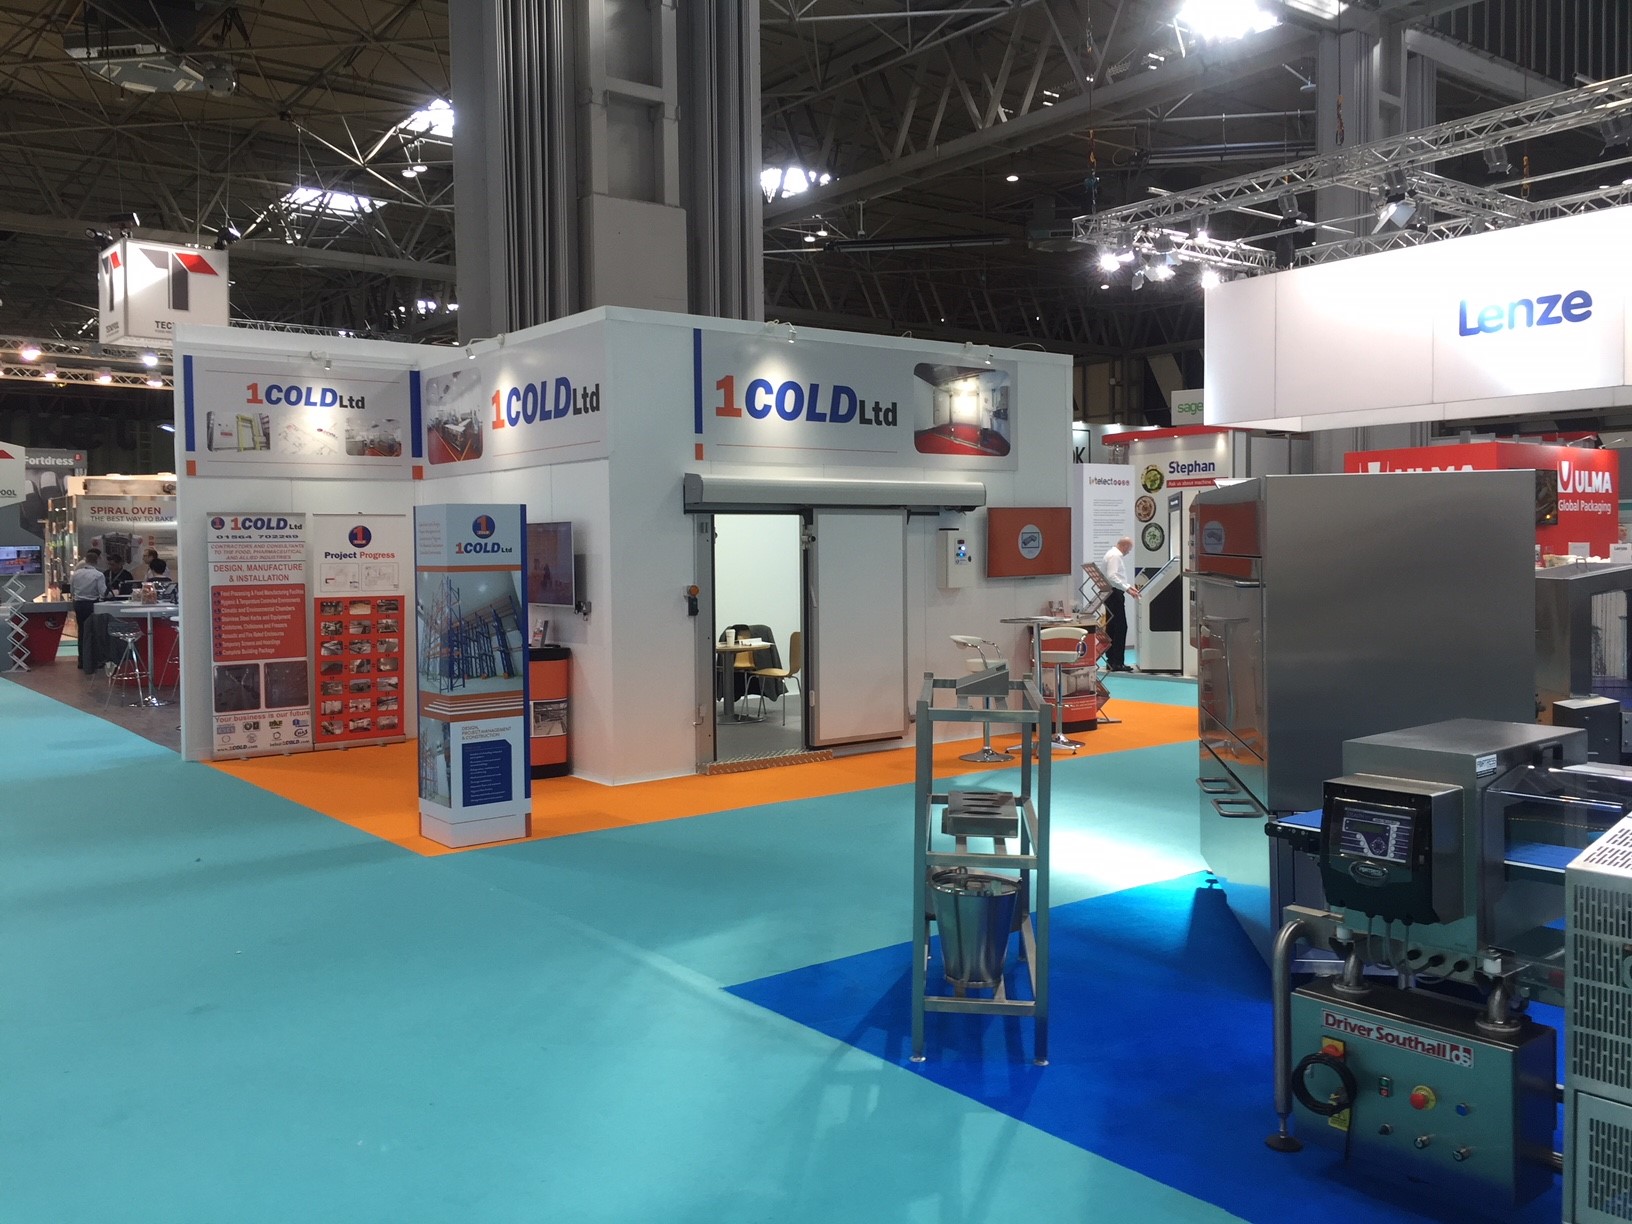 Foodex 2018 Stand